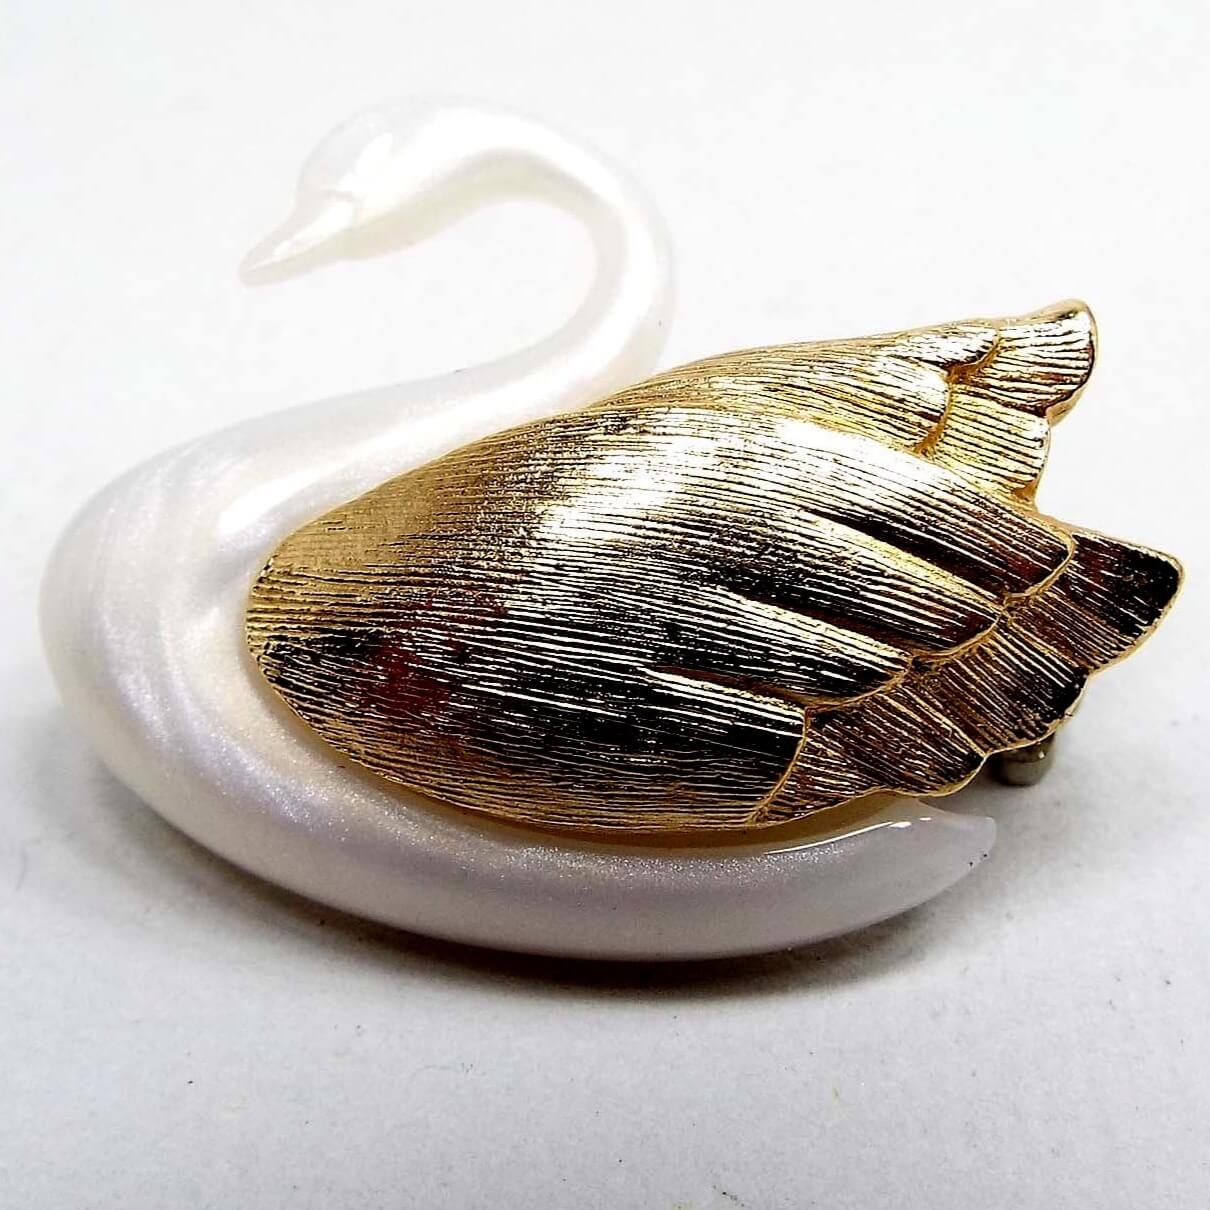 Front view of the retro vintage Avon swan brooch pin. It is pearly white in color and has gold tone color textured metal wings.